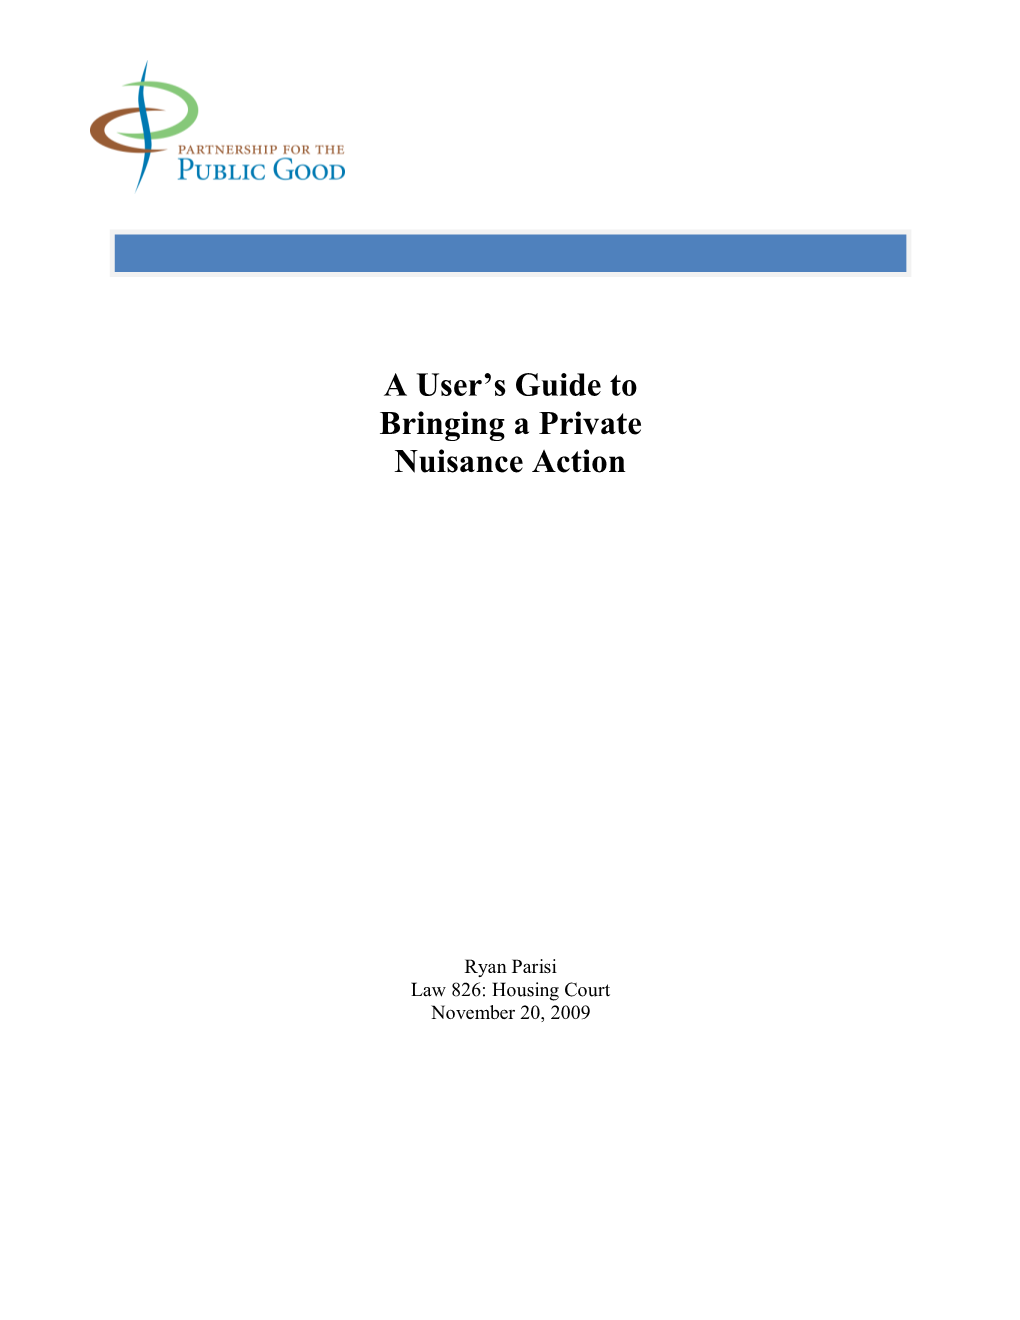 A User's Guide to Bringing a Private Nuisance Action